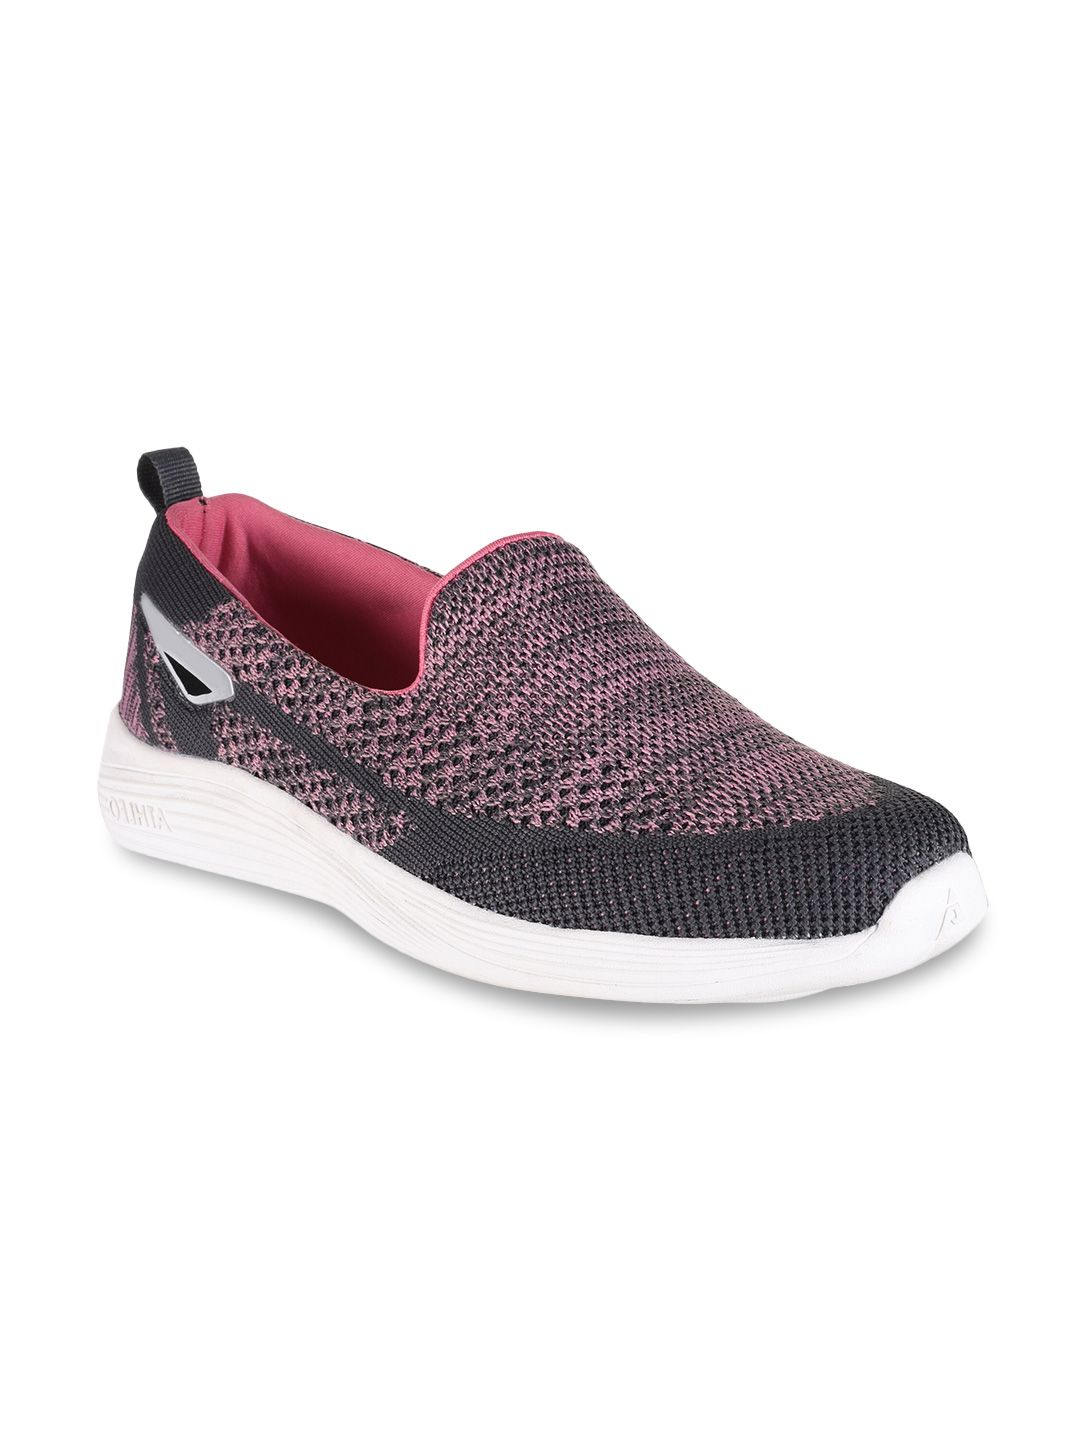 Action Women Pink Mesh Running Shoes Price in India